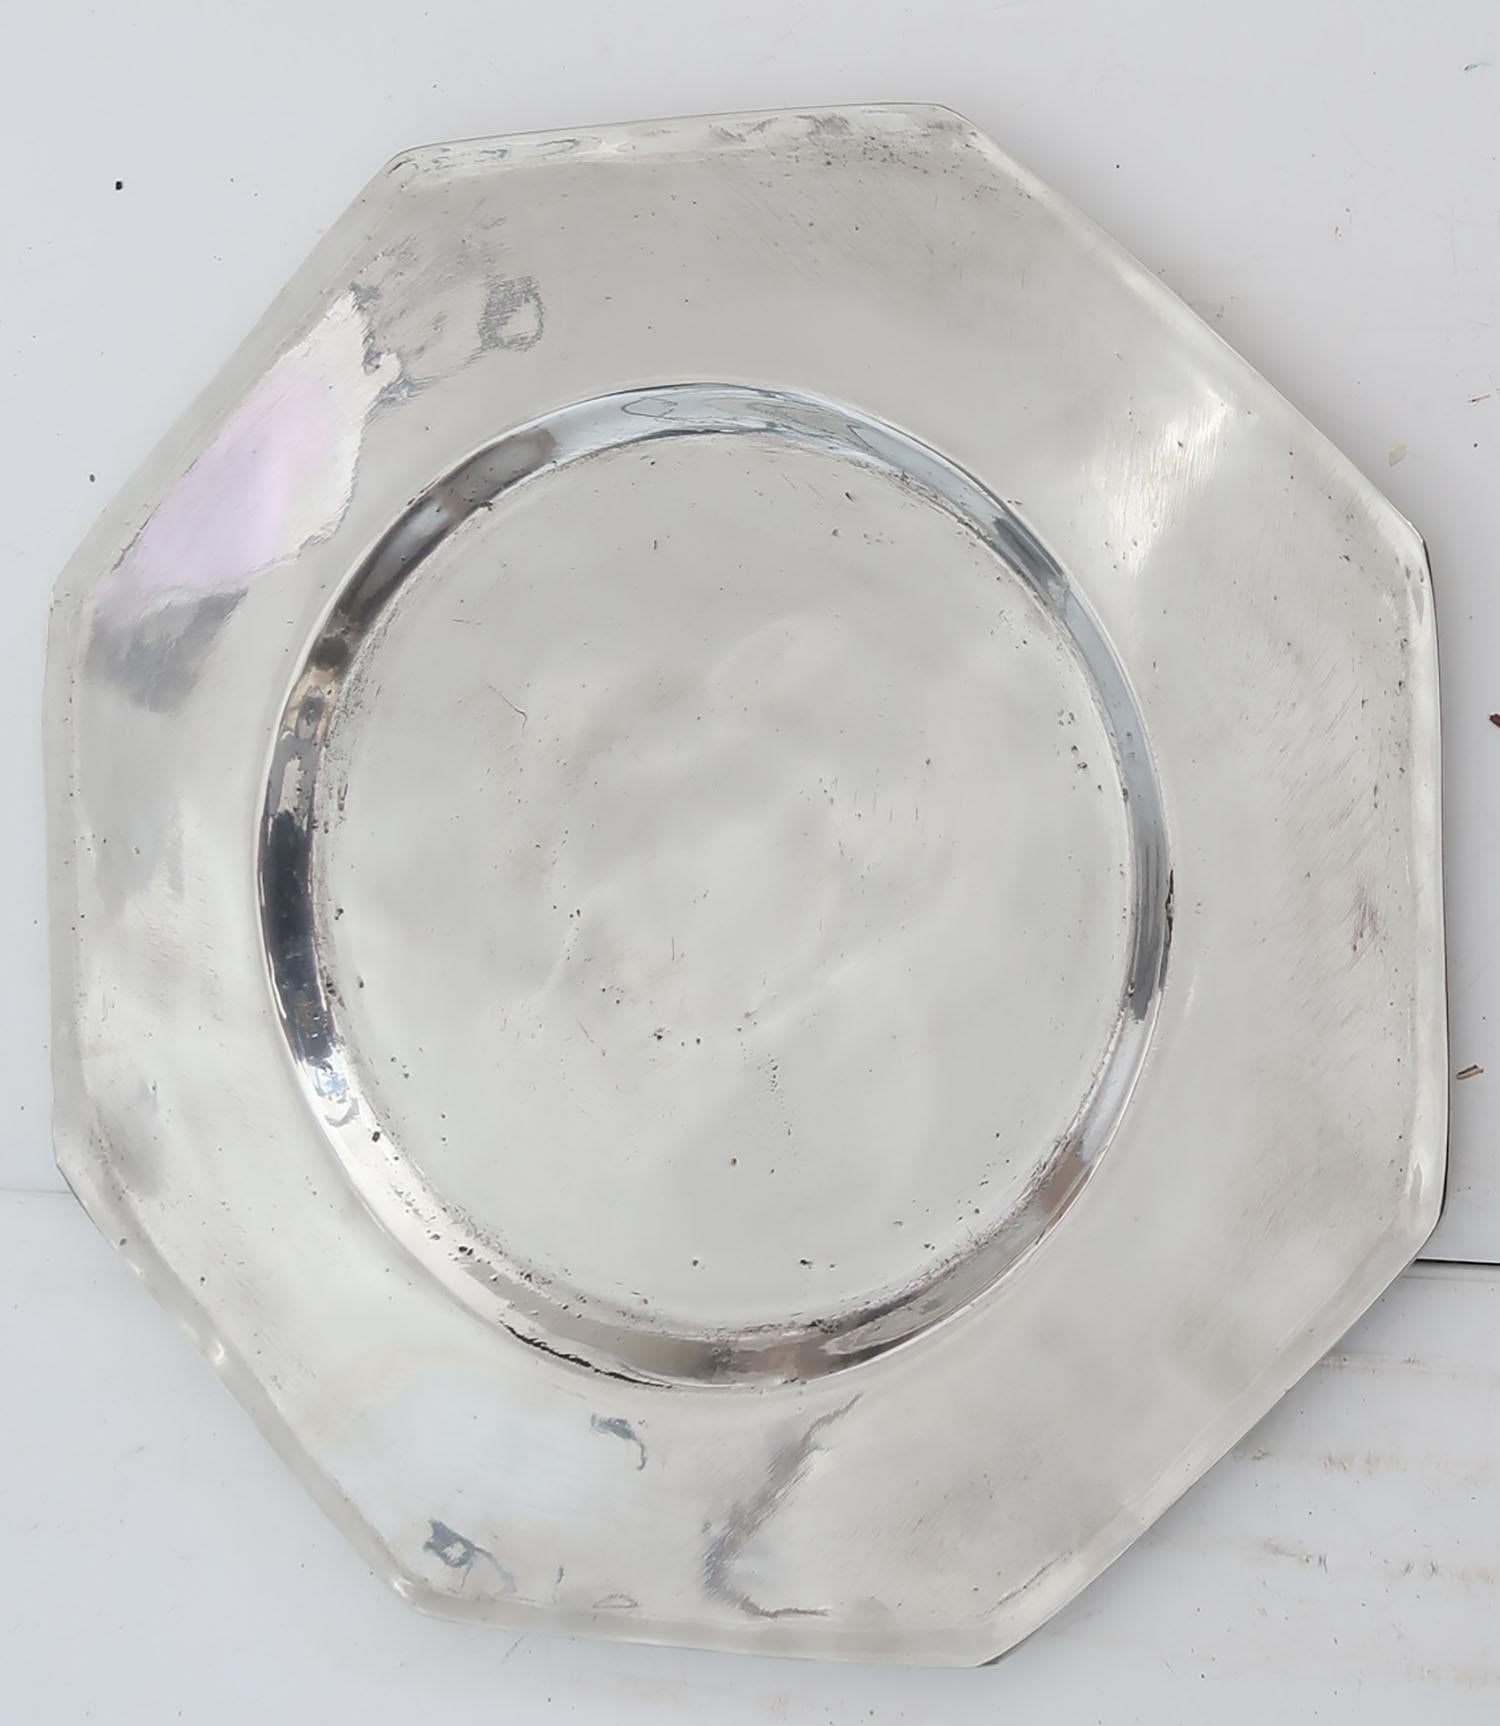 Fabulous pewter plate

Most unusual shape

Continental, probably Swedish

Clear touch mark on the underside

The pewter has been polished to its original shine to imitate polished silver. It was known as the Poor Man's Silver.


The great